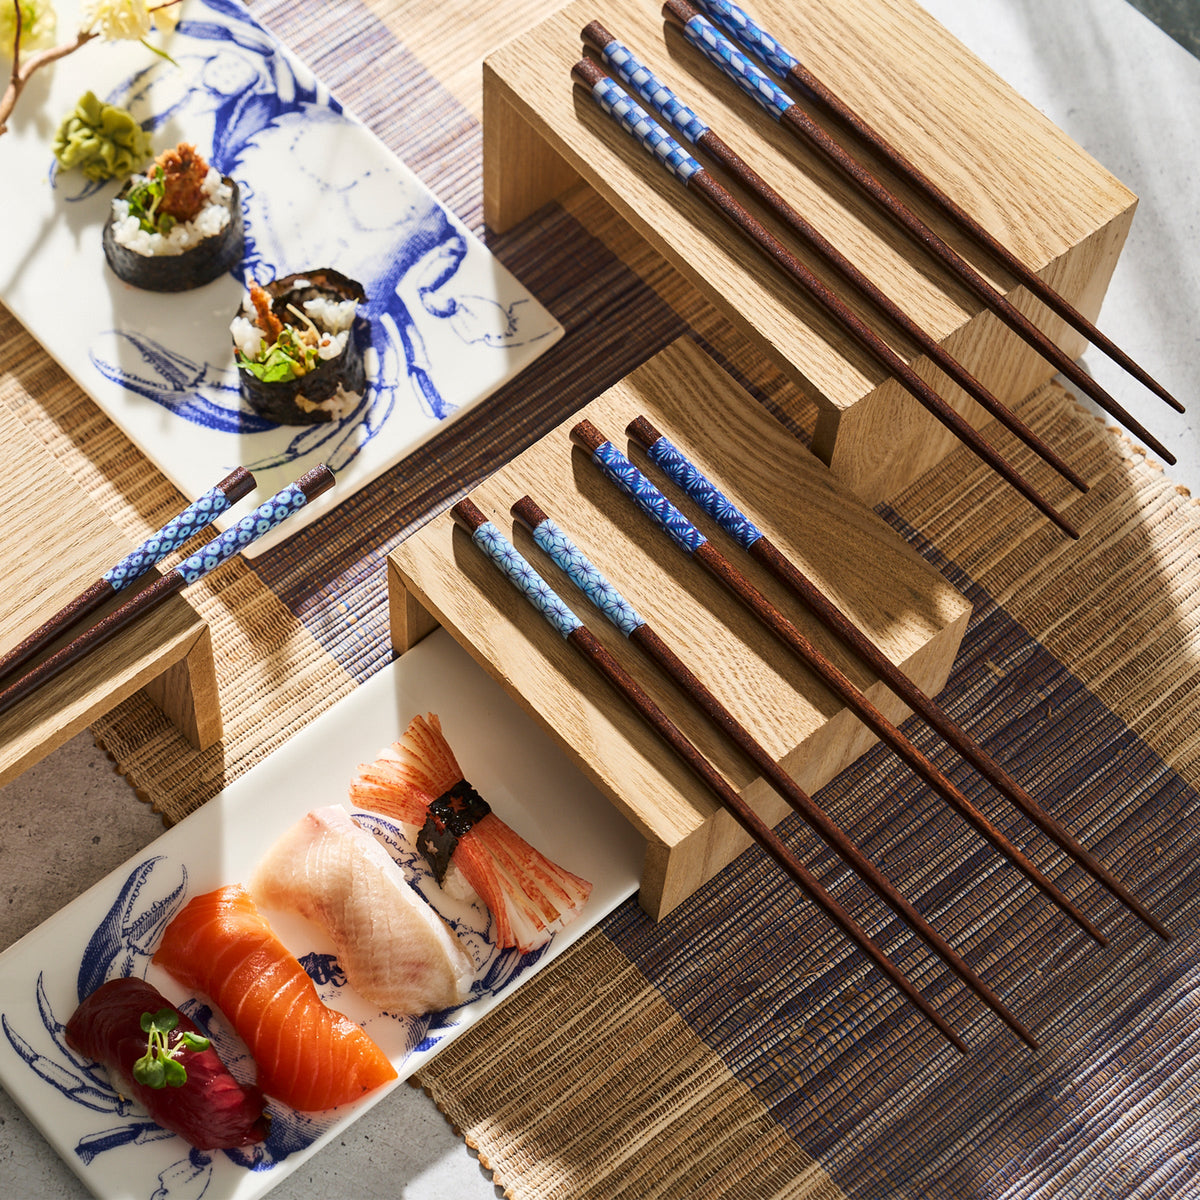 Yokohama Chopsticks and sushi trays on a wooden table in Japan.